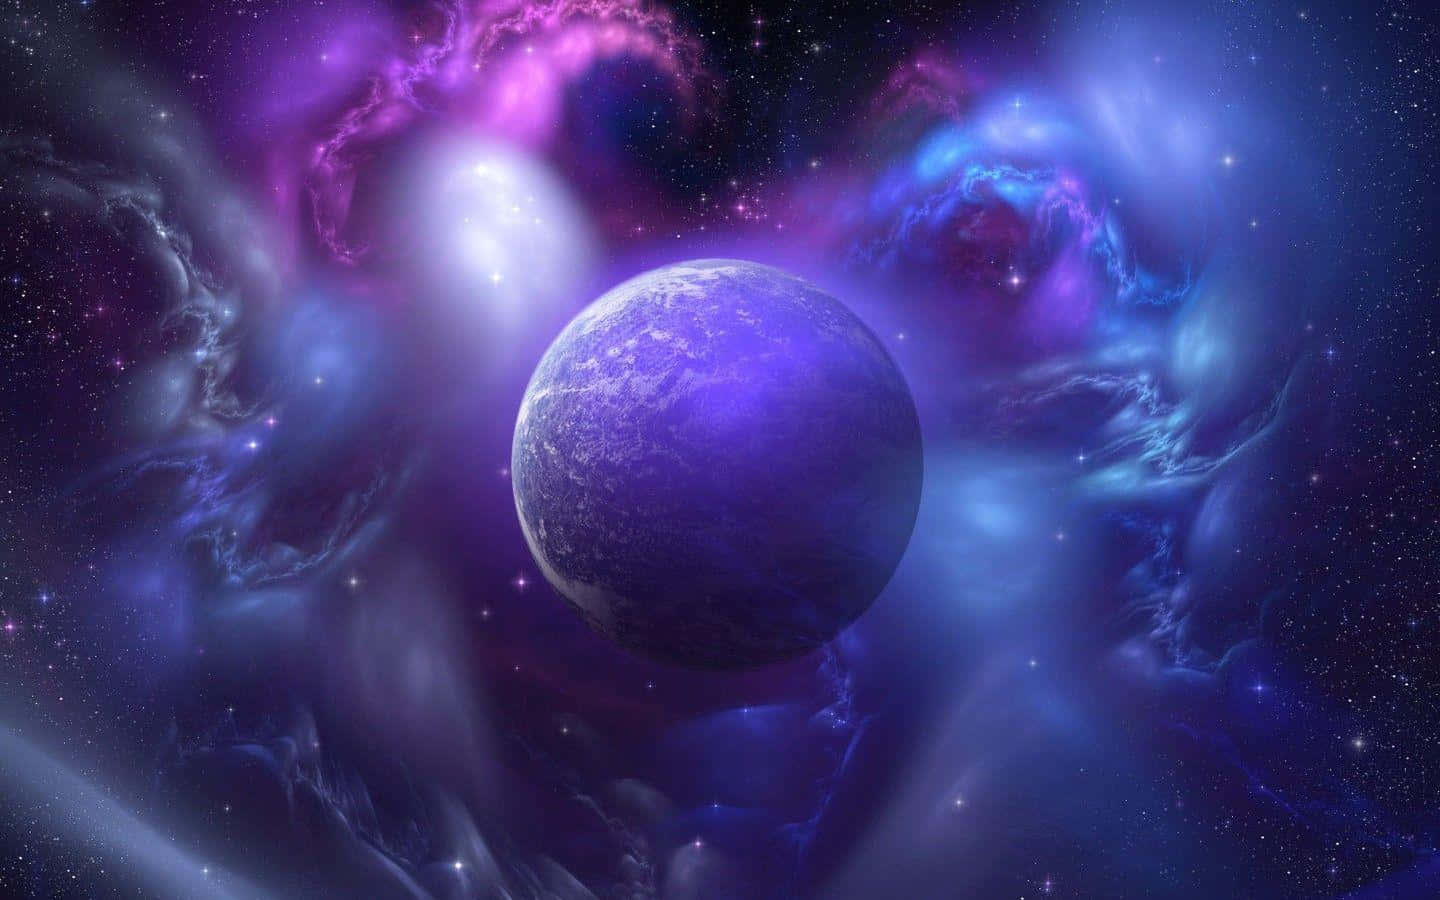 “Discover the Next Frontier with Purple Space”